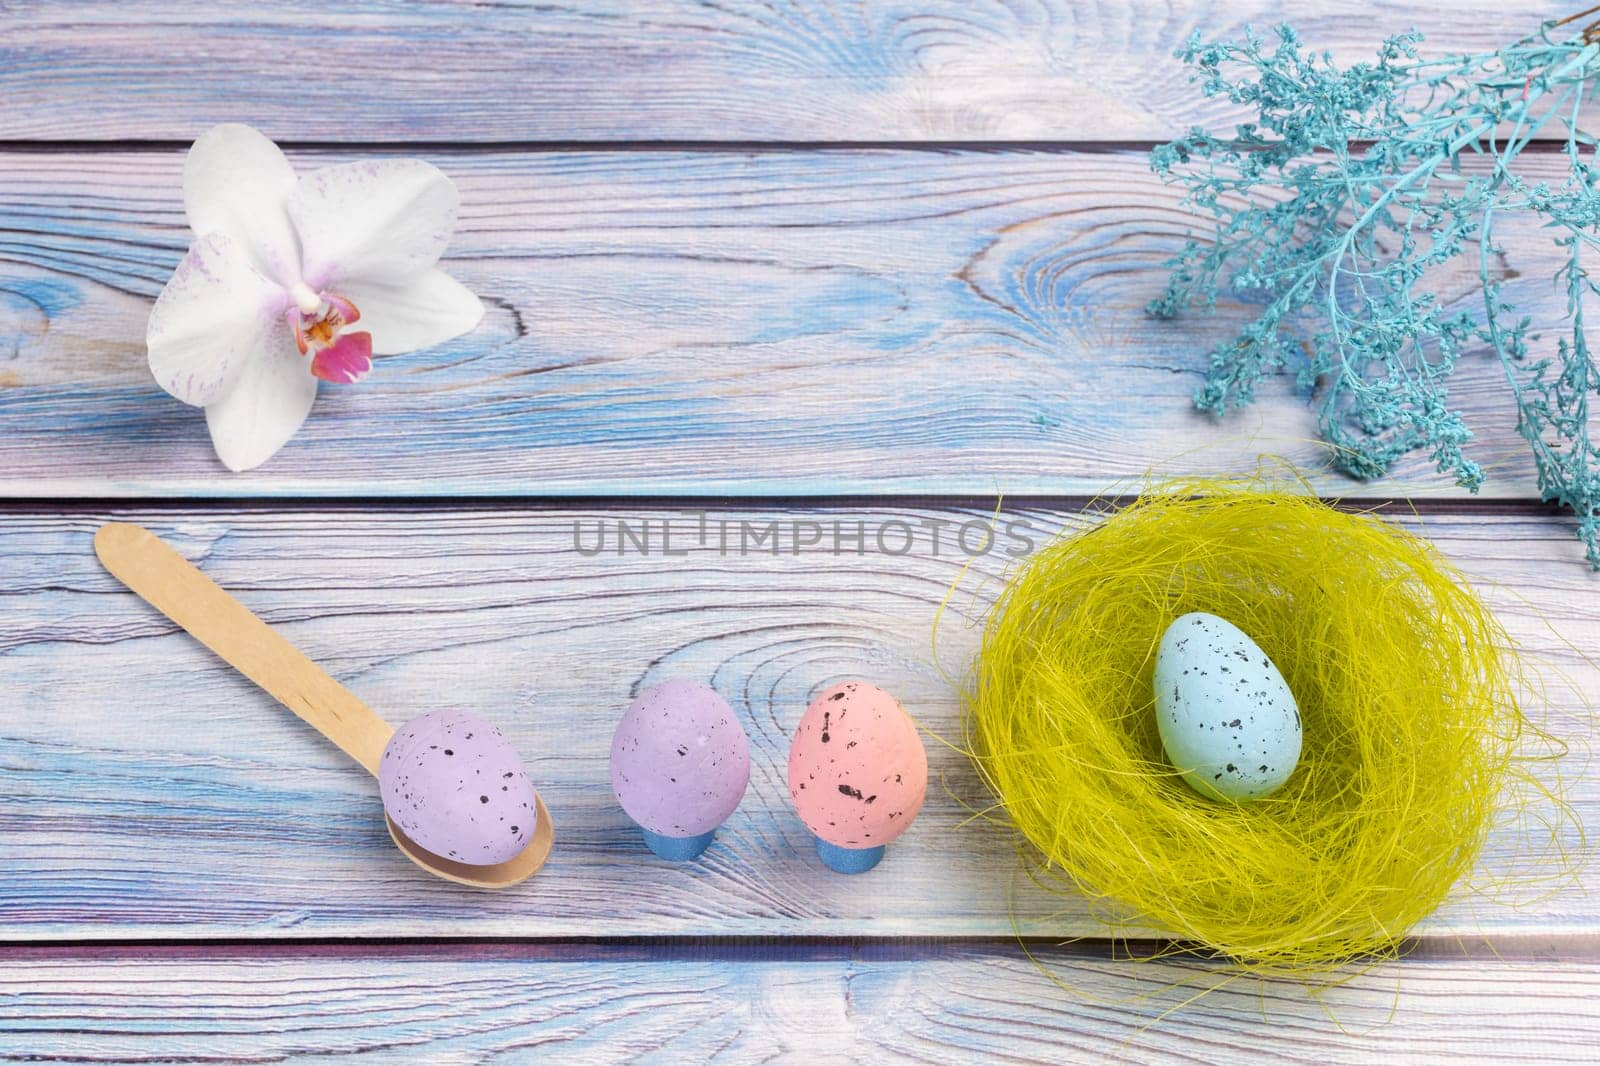 Nest with a colored Easter egg and an orchid flower on the wooden background. by mvg6894